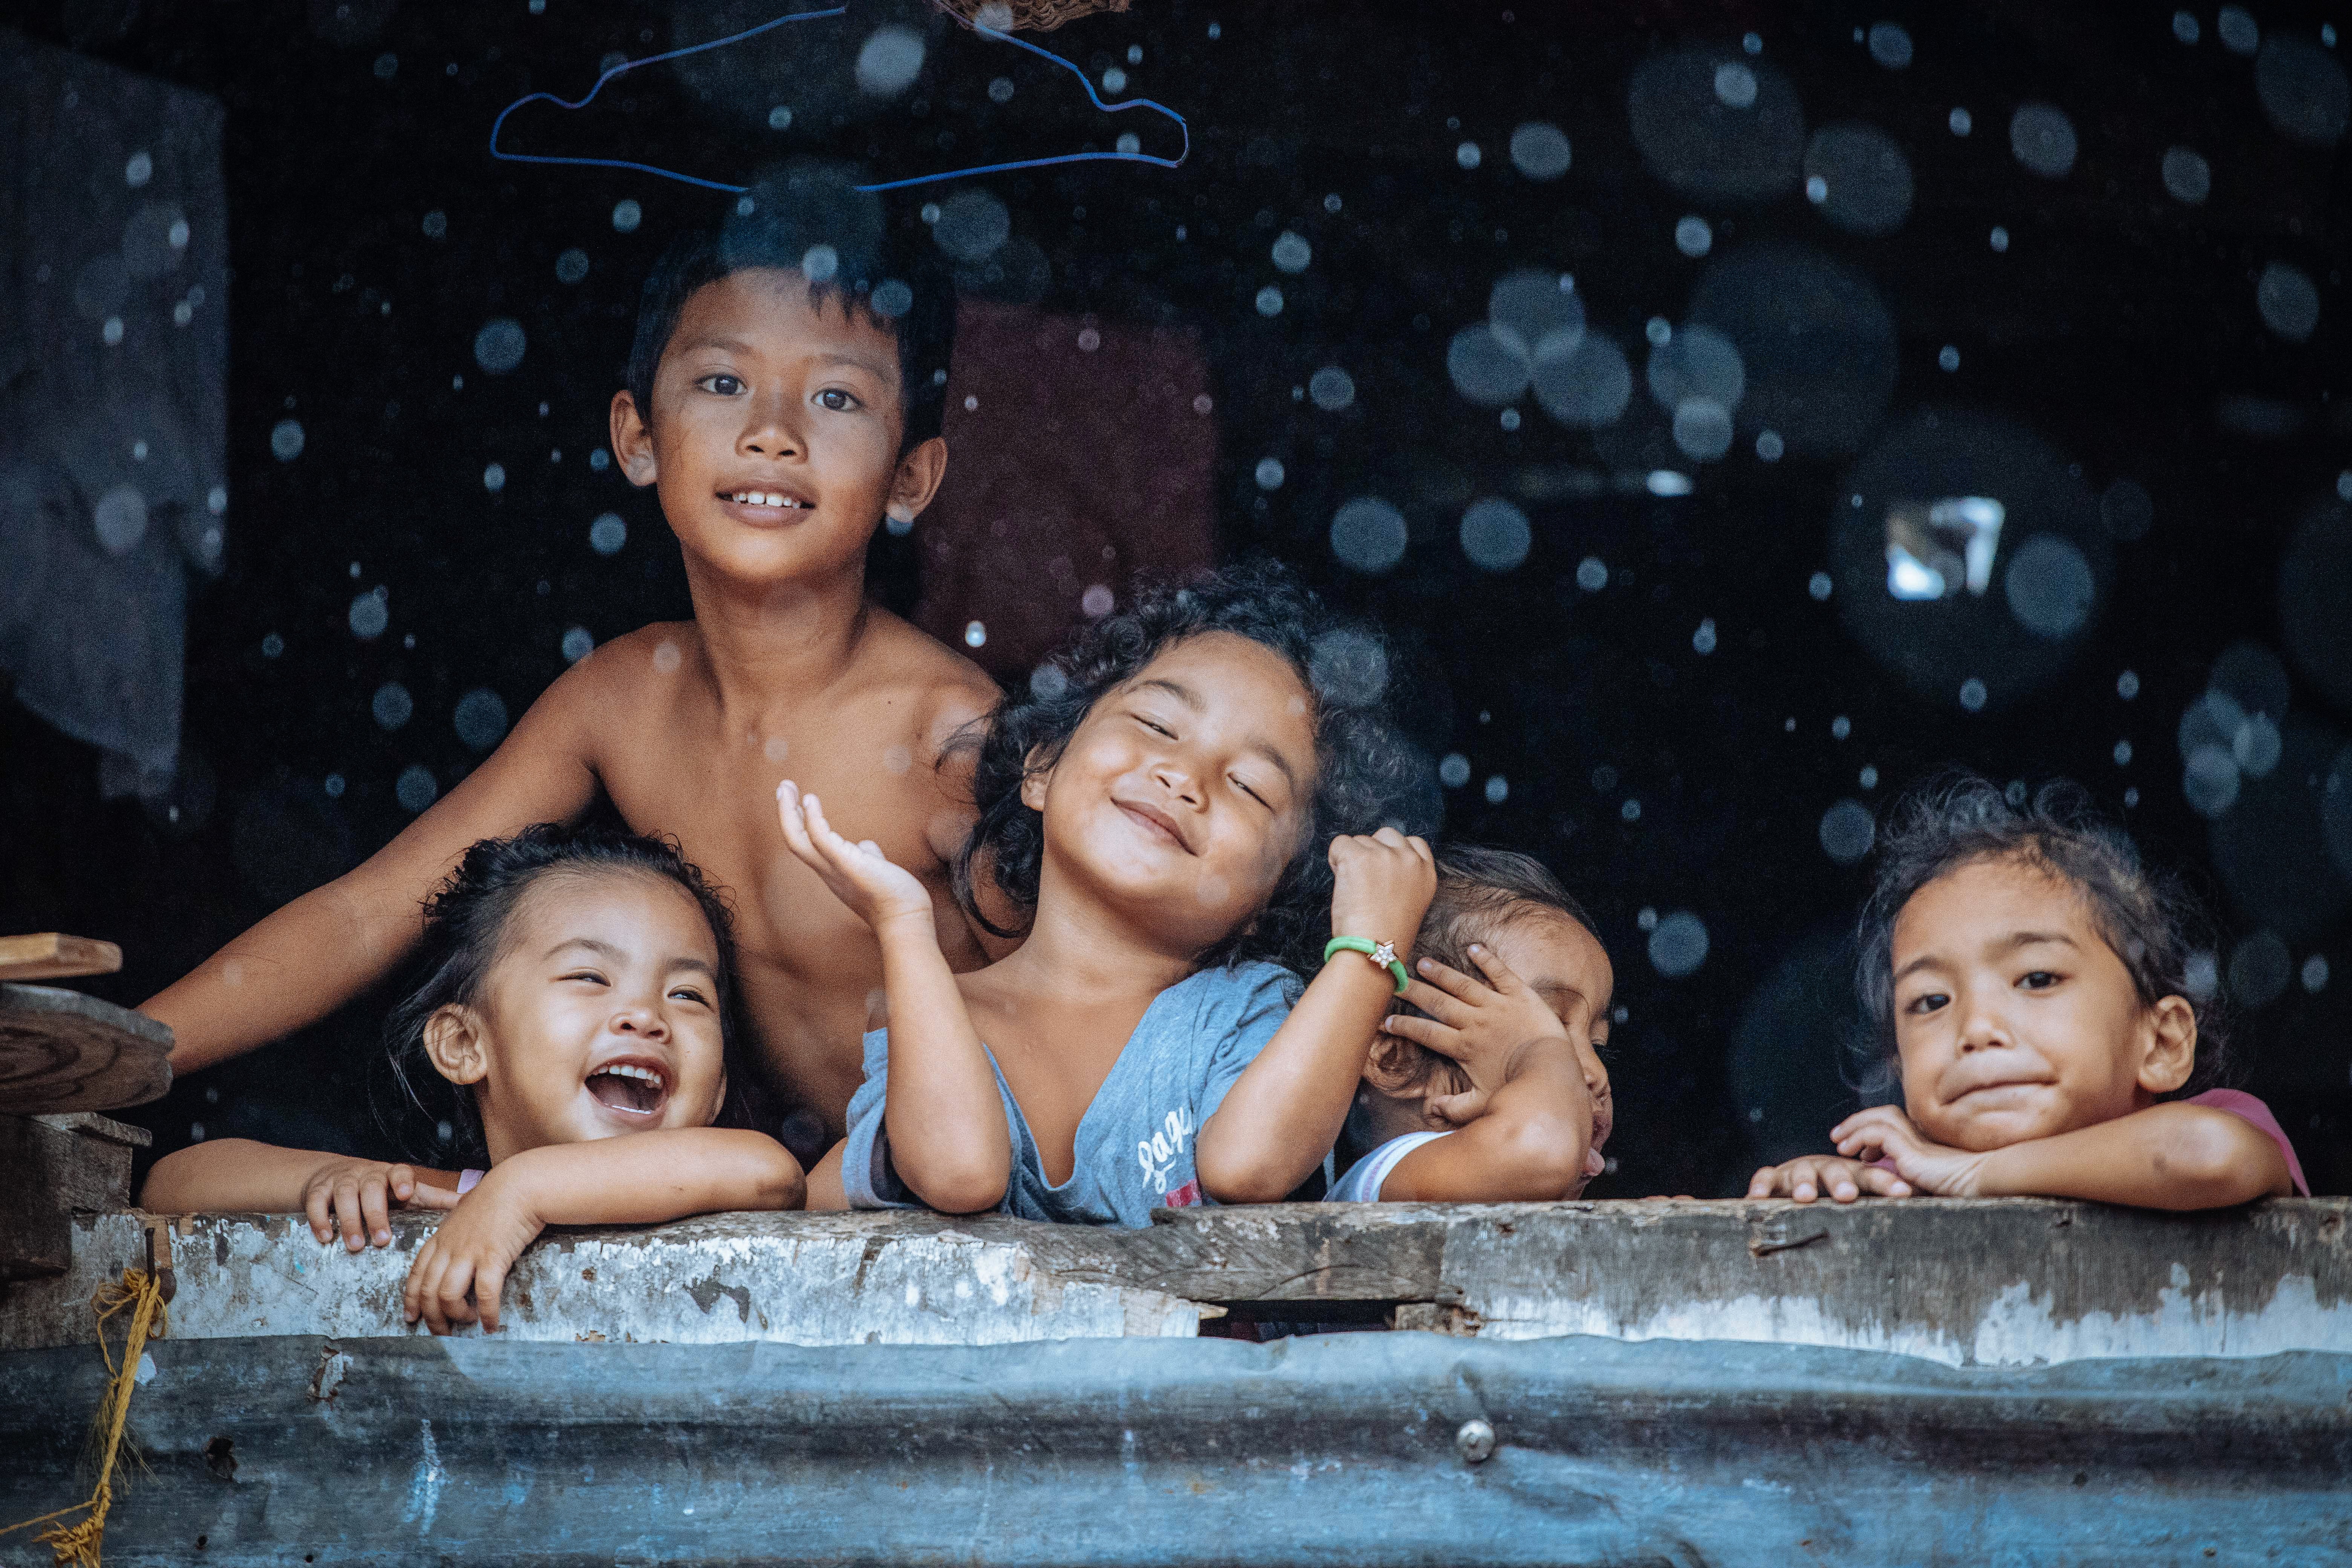 A group of young children in the Philippines (Hartmut Schwartzbach/CEWE Photo Award/PA)